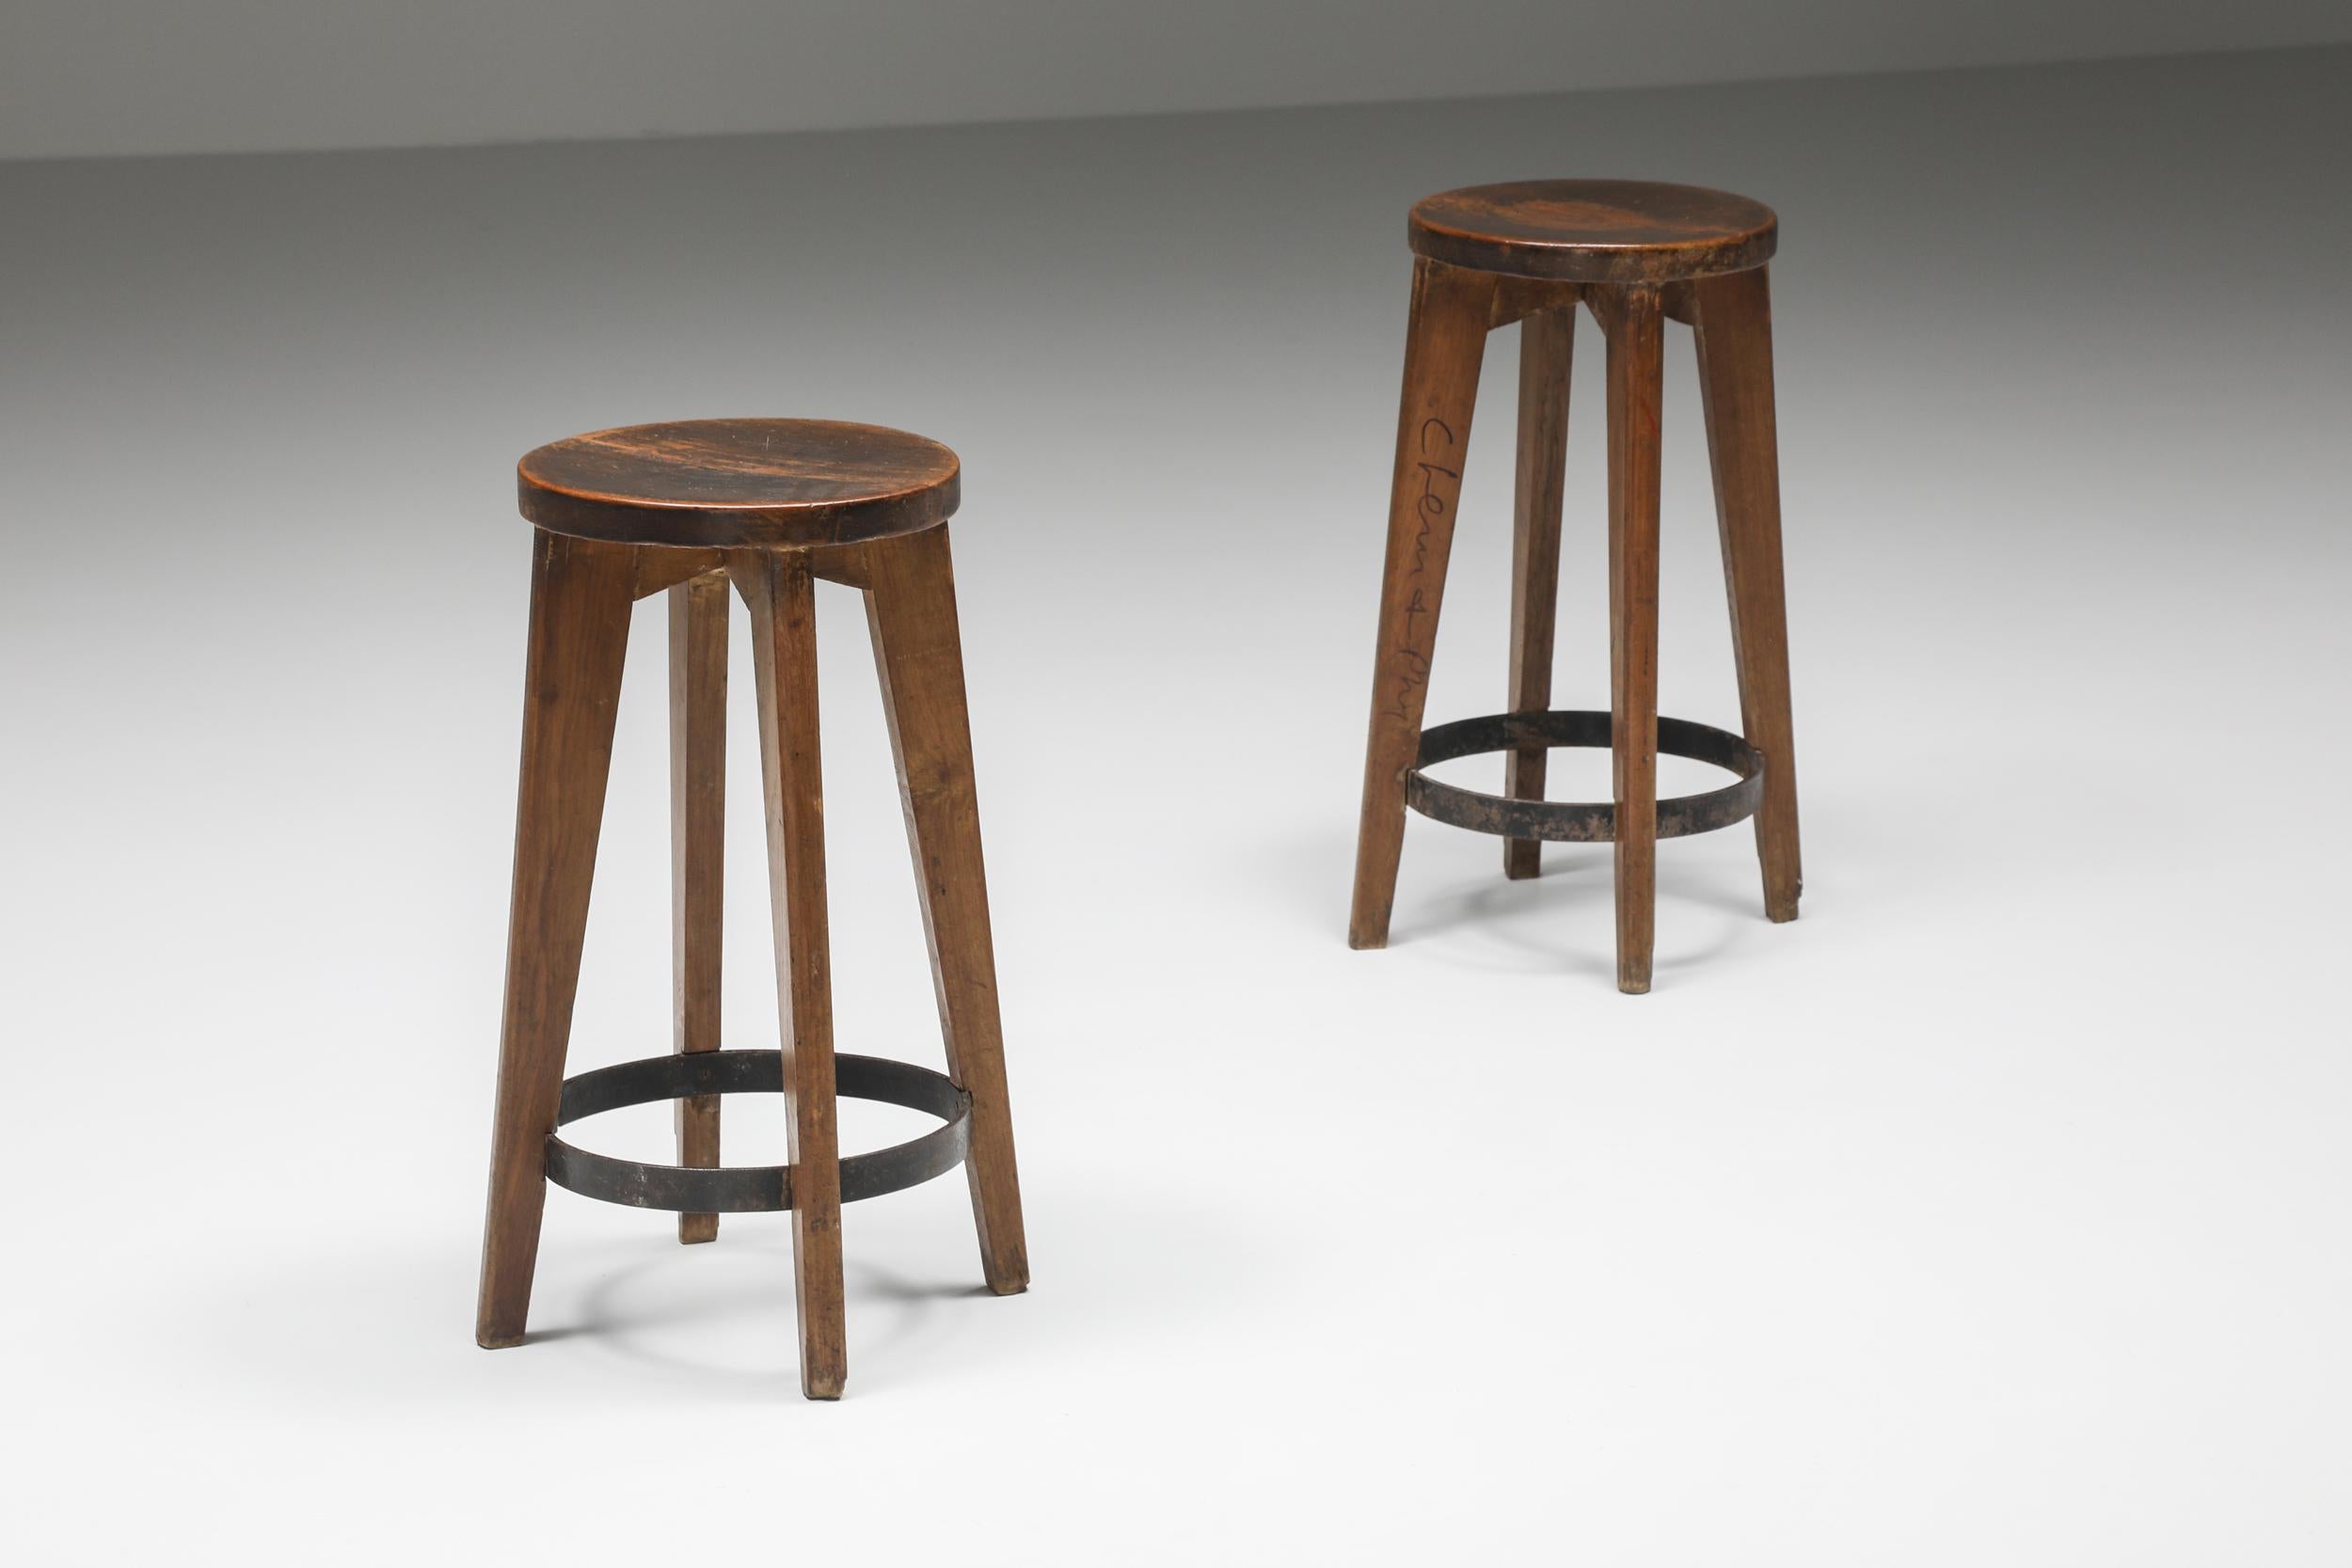 Pierre Jeanneret Chandigarh Stools; French design; Chandigarh India, Corbusier, Charlotte Perriand. 

Pierre Jeanneret Stools 1965-1967, Authentic Mid-Century Modern. 

This stool is not only a fantastic piece. This stool is a rare collector